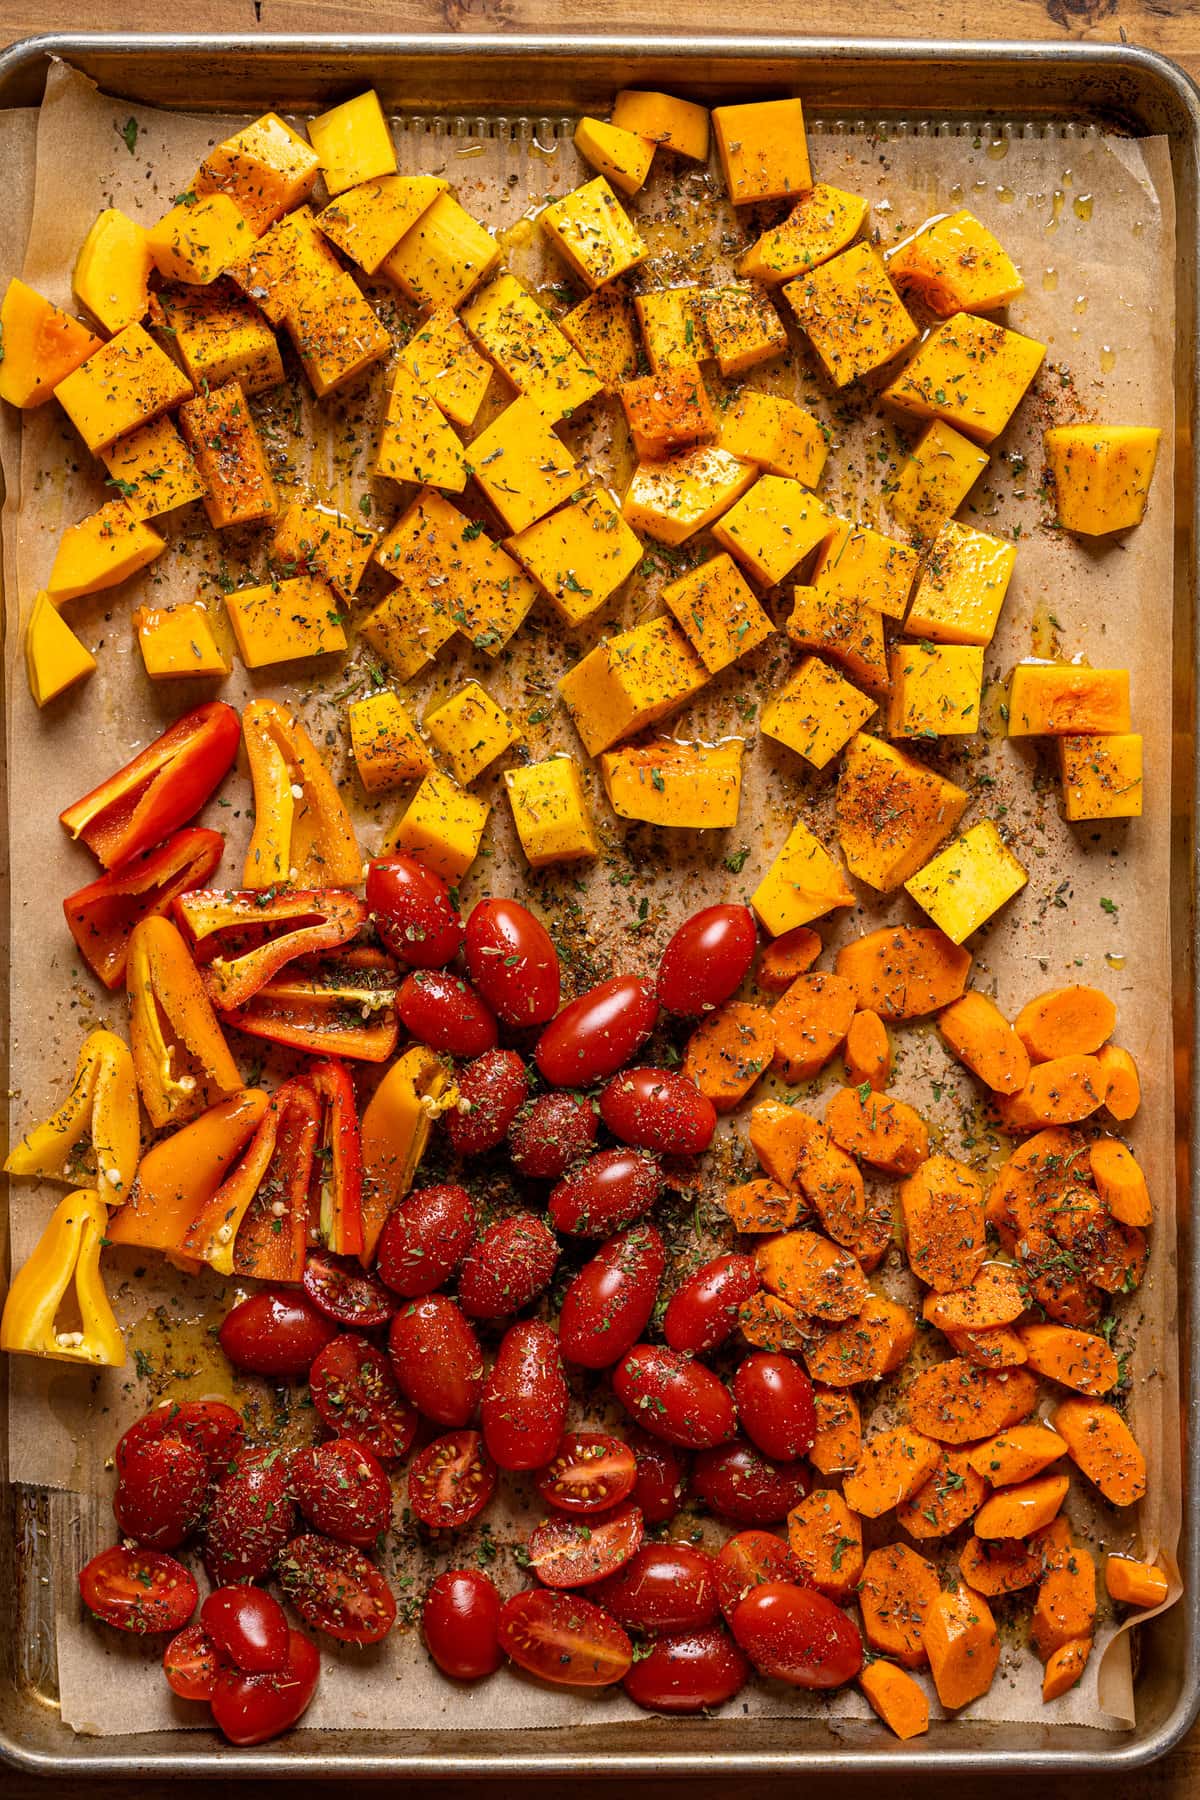 Sheet pan of seasoned butternut squash, carrots, peppers, and grape tomatoes